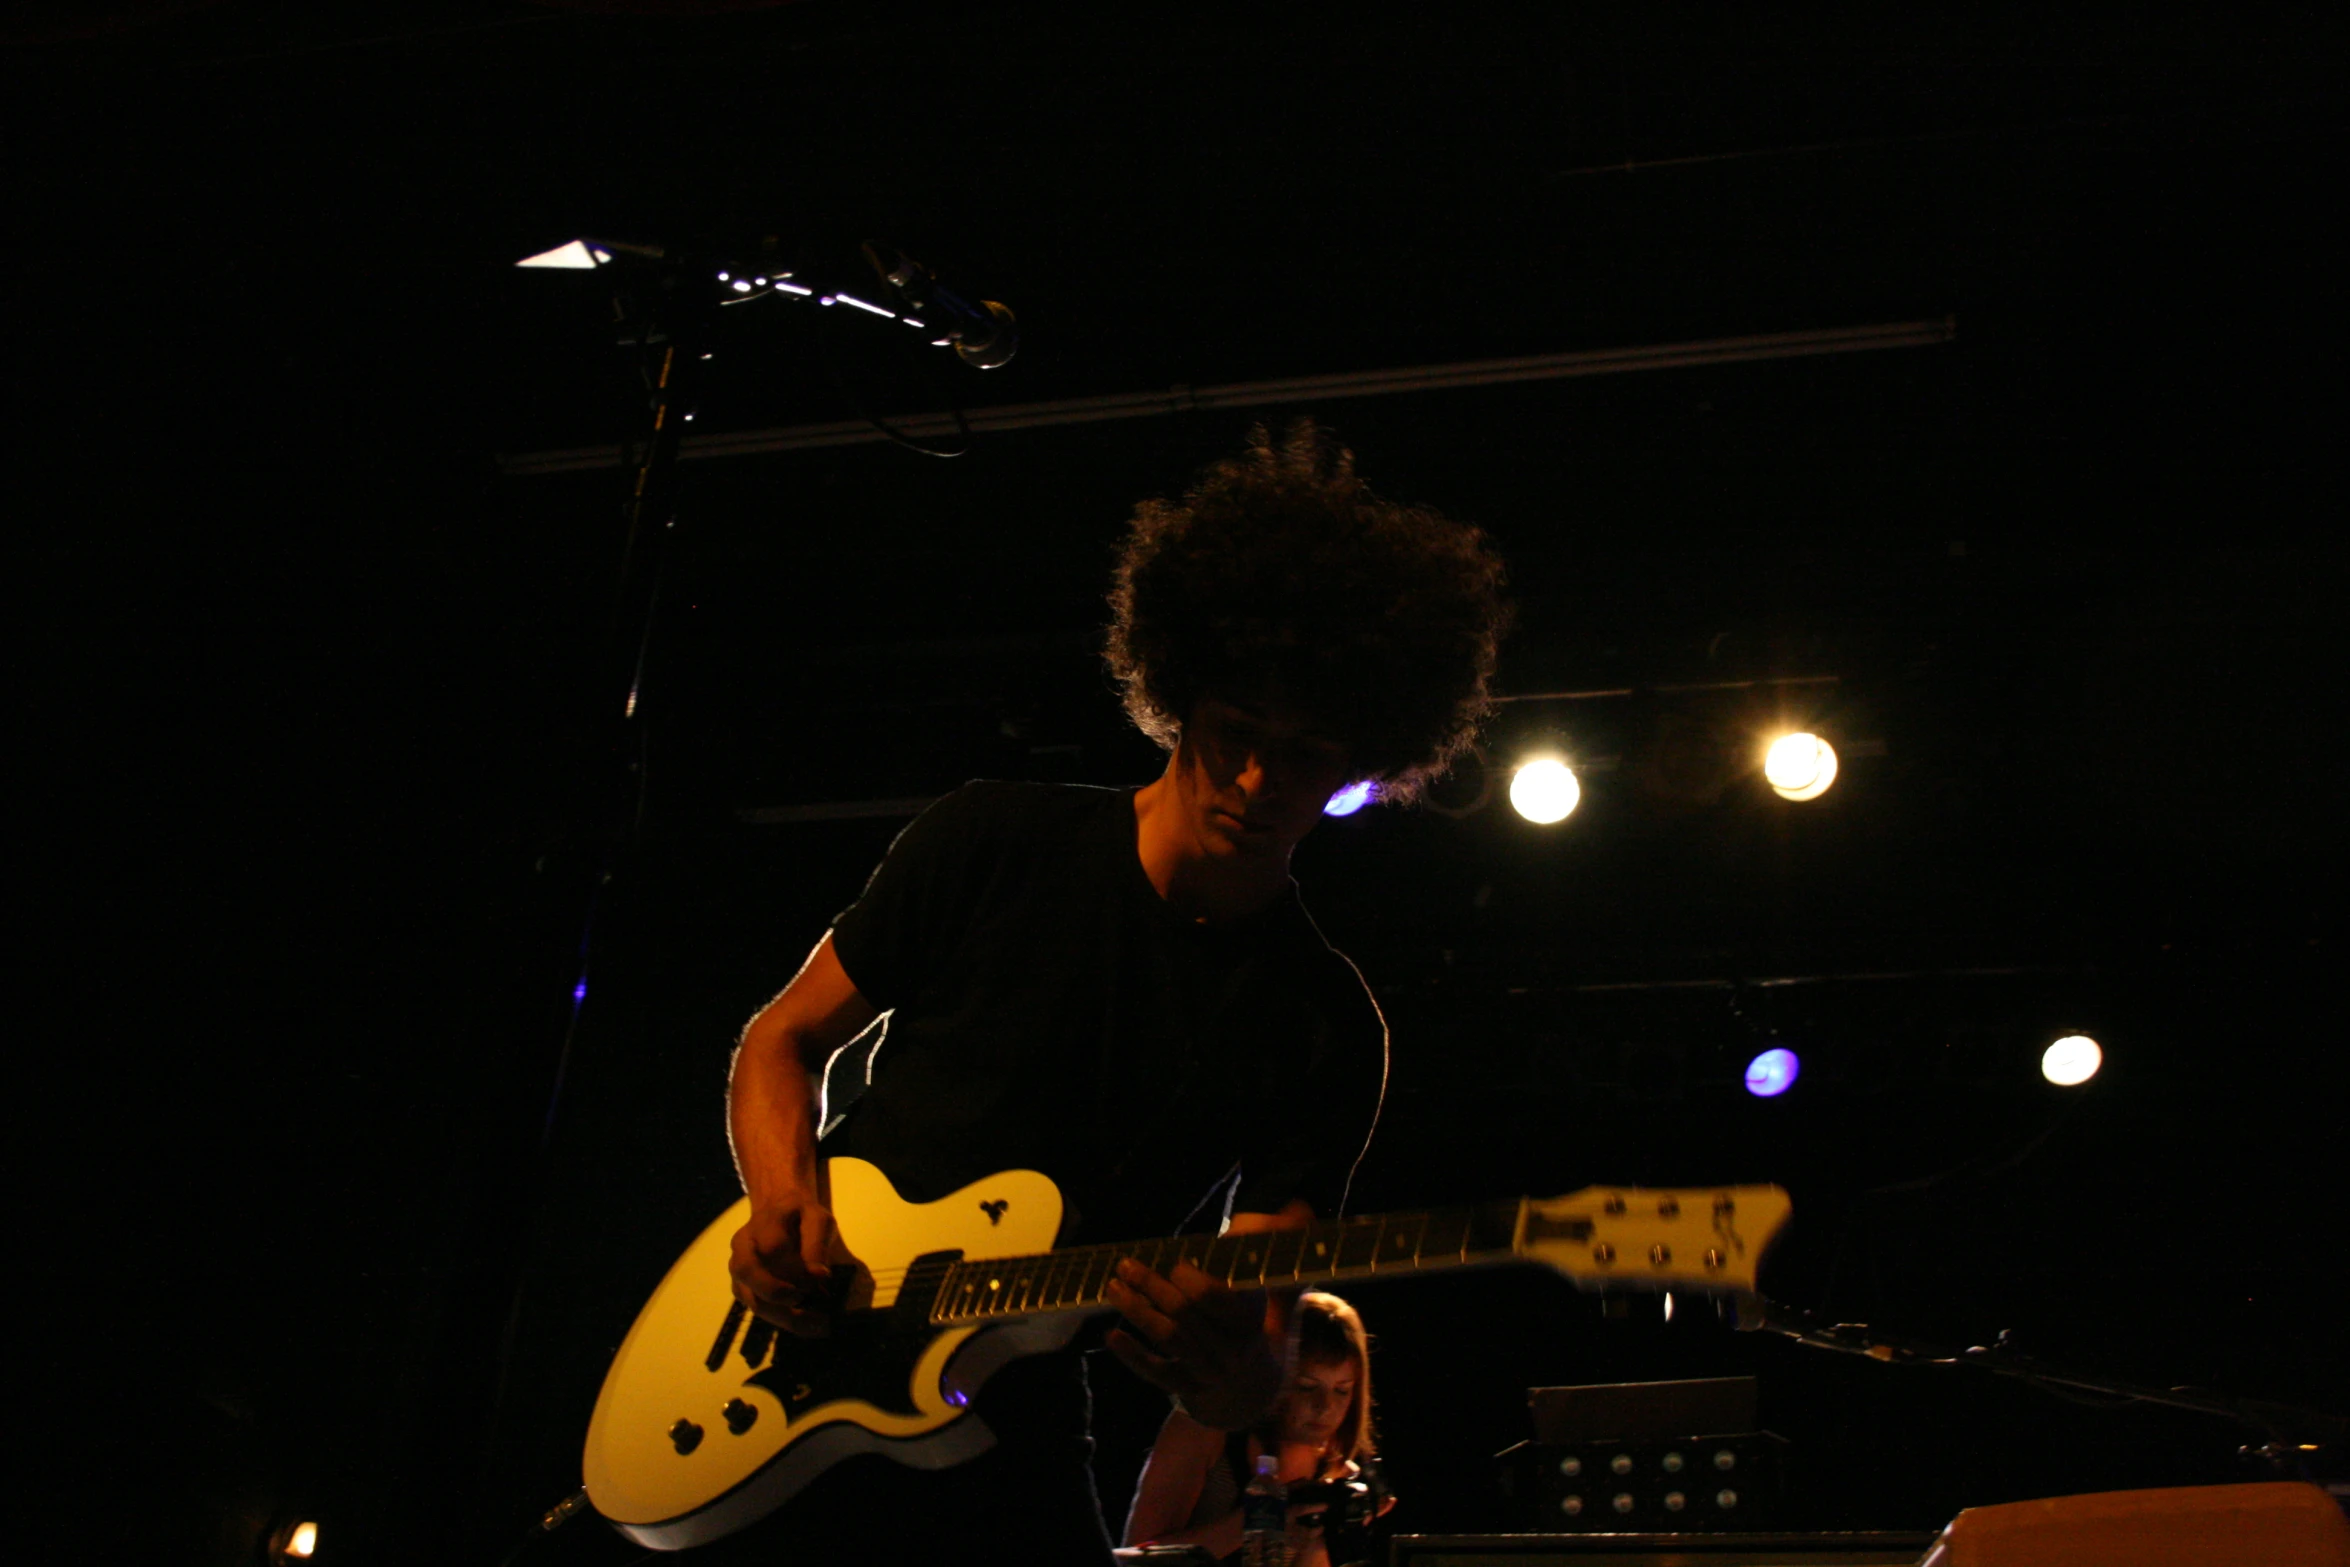 a person is playing a guitar on stage